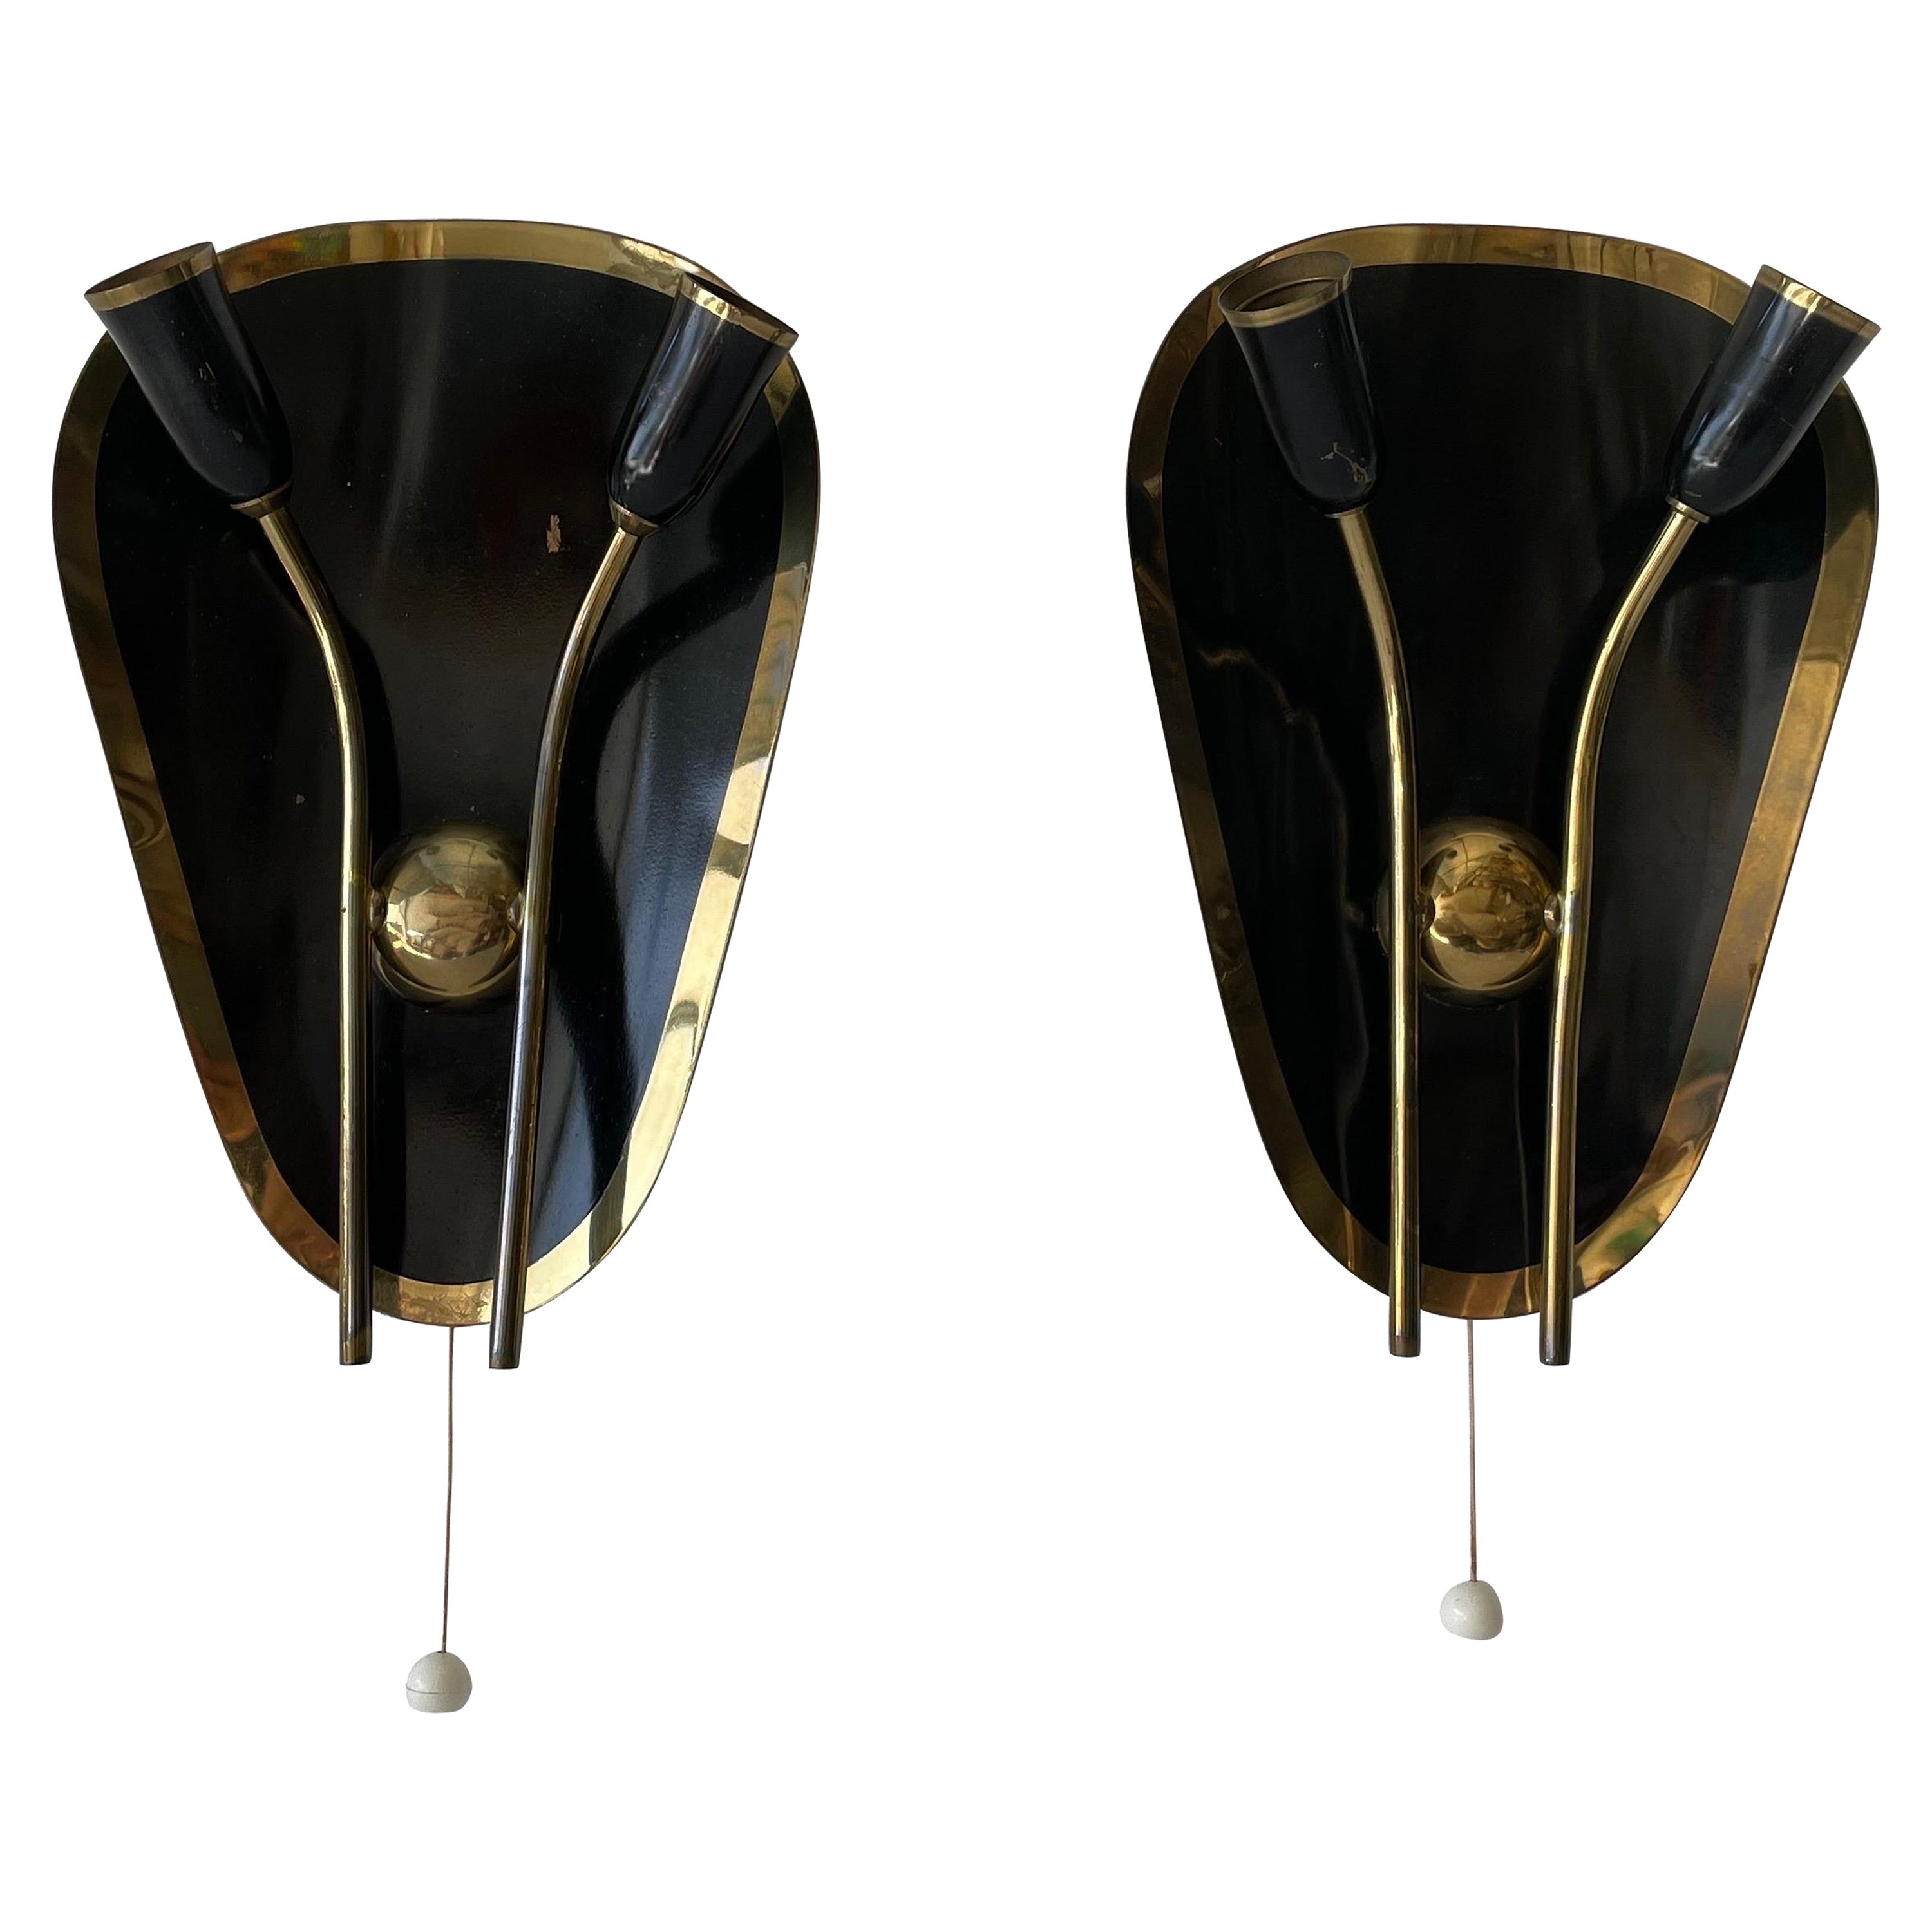 Exclusive Atomic Design Brass Black Metal Pair of Sconces, 1950s, Germany For Sale